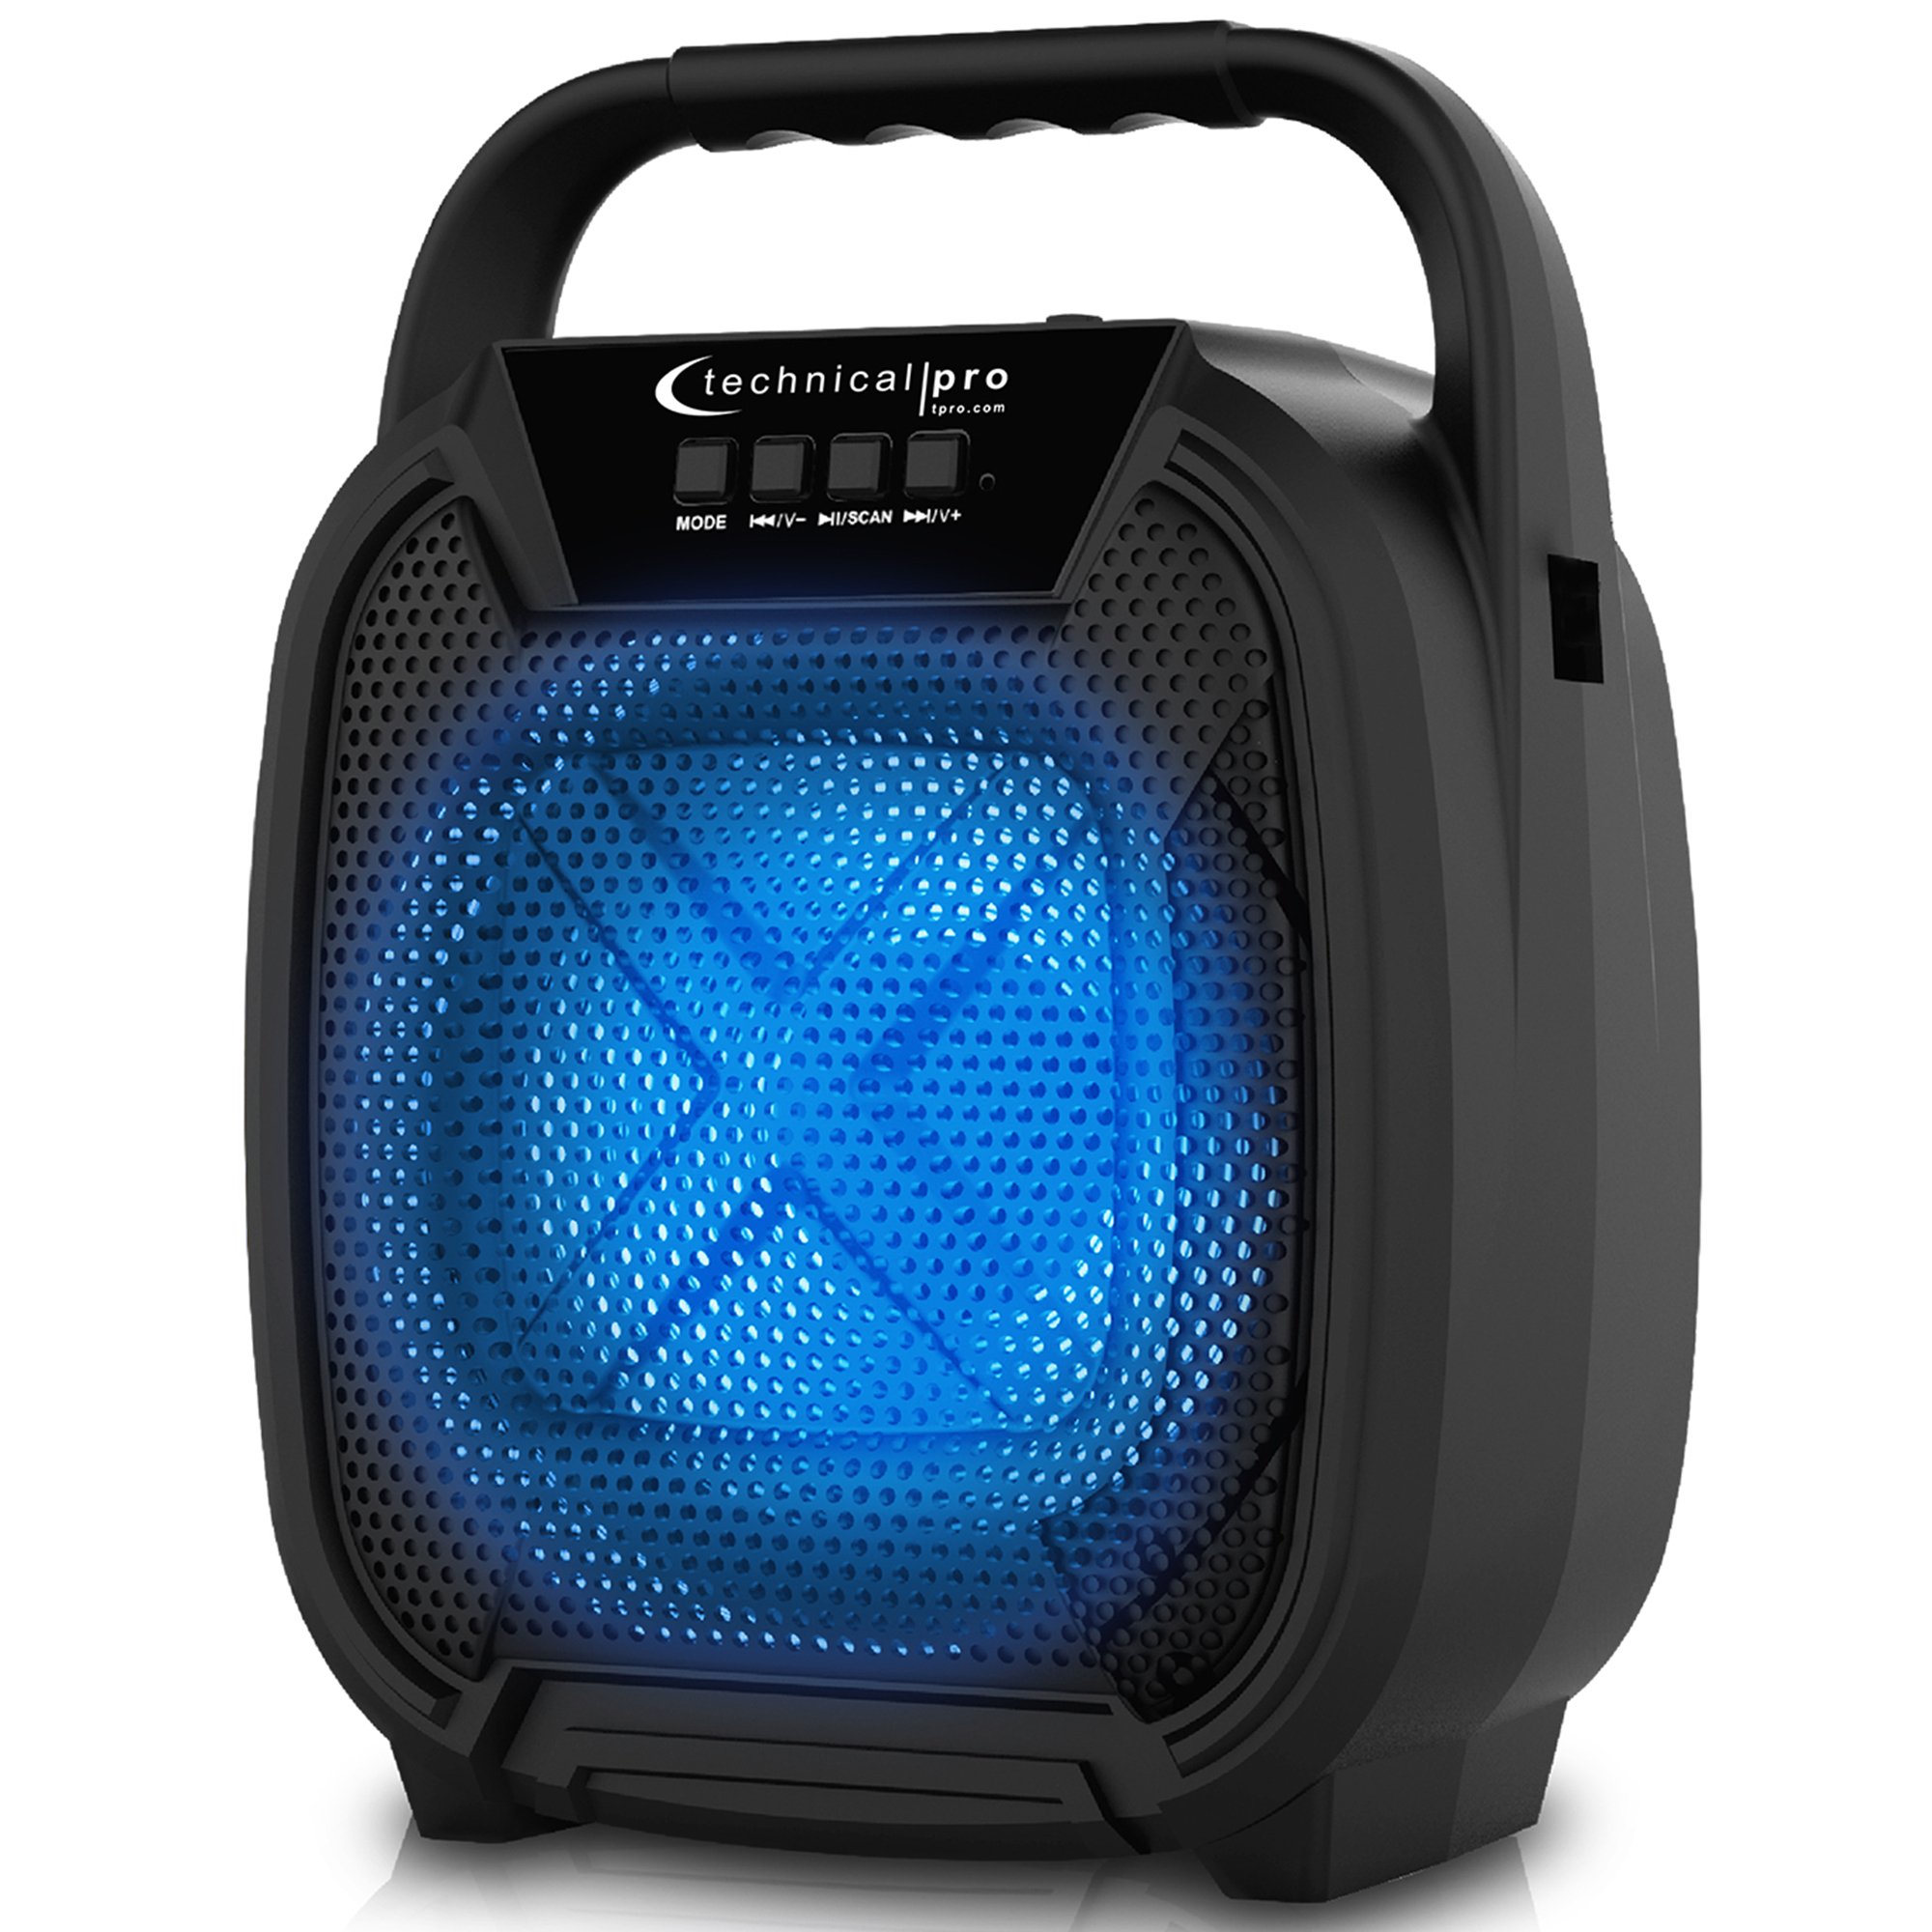 Technical Pro Portable 300 Watts Bluetooth Speaker W/ USB CD And Mic Inputs, FM Radio & Carry Handle, Offers 3 Hours Of Continual Music